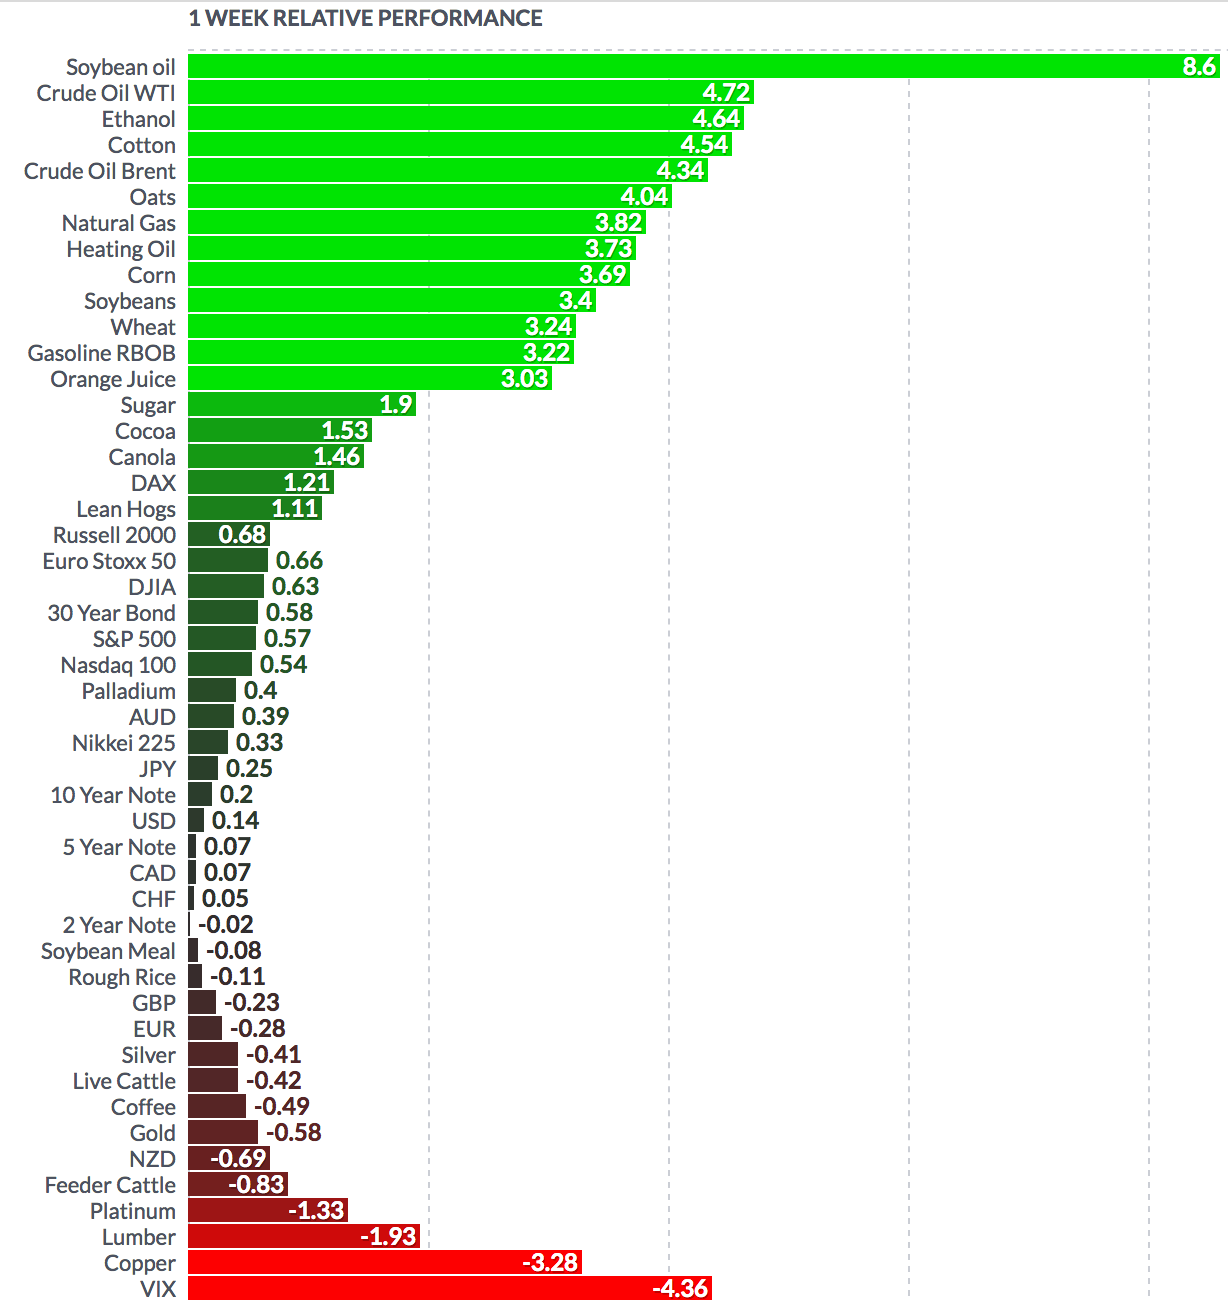 FUTURES-Weekly Performance